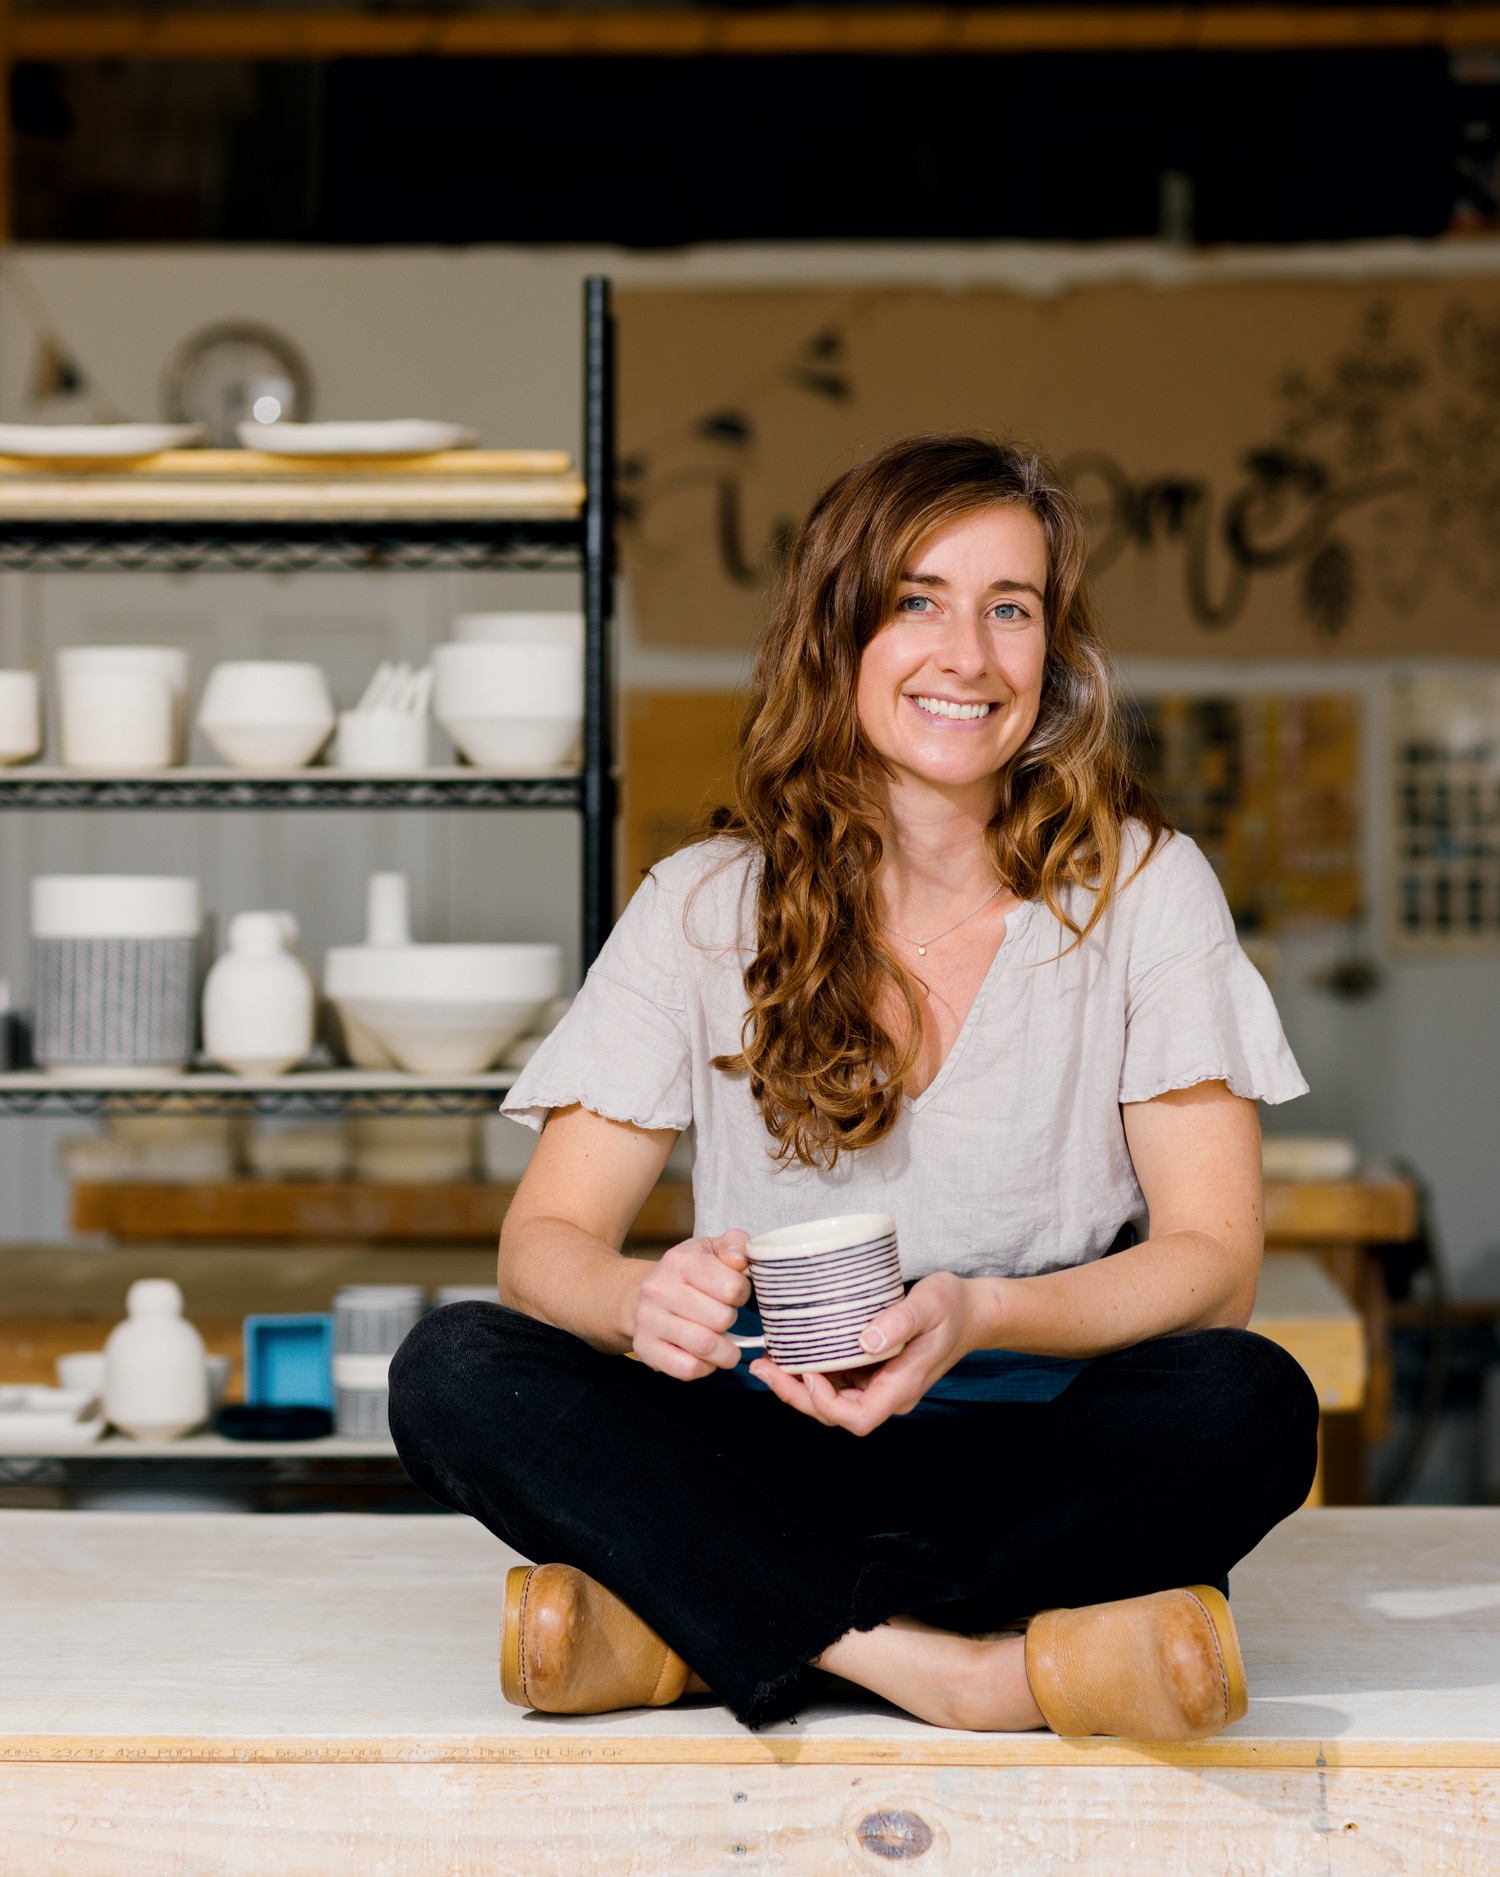 5 Shops to Purchase Pottery That's Made in RI - Rhode Island Monthly